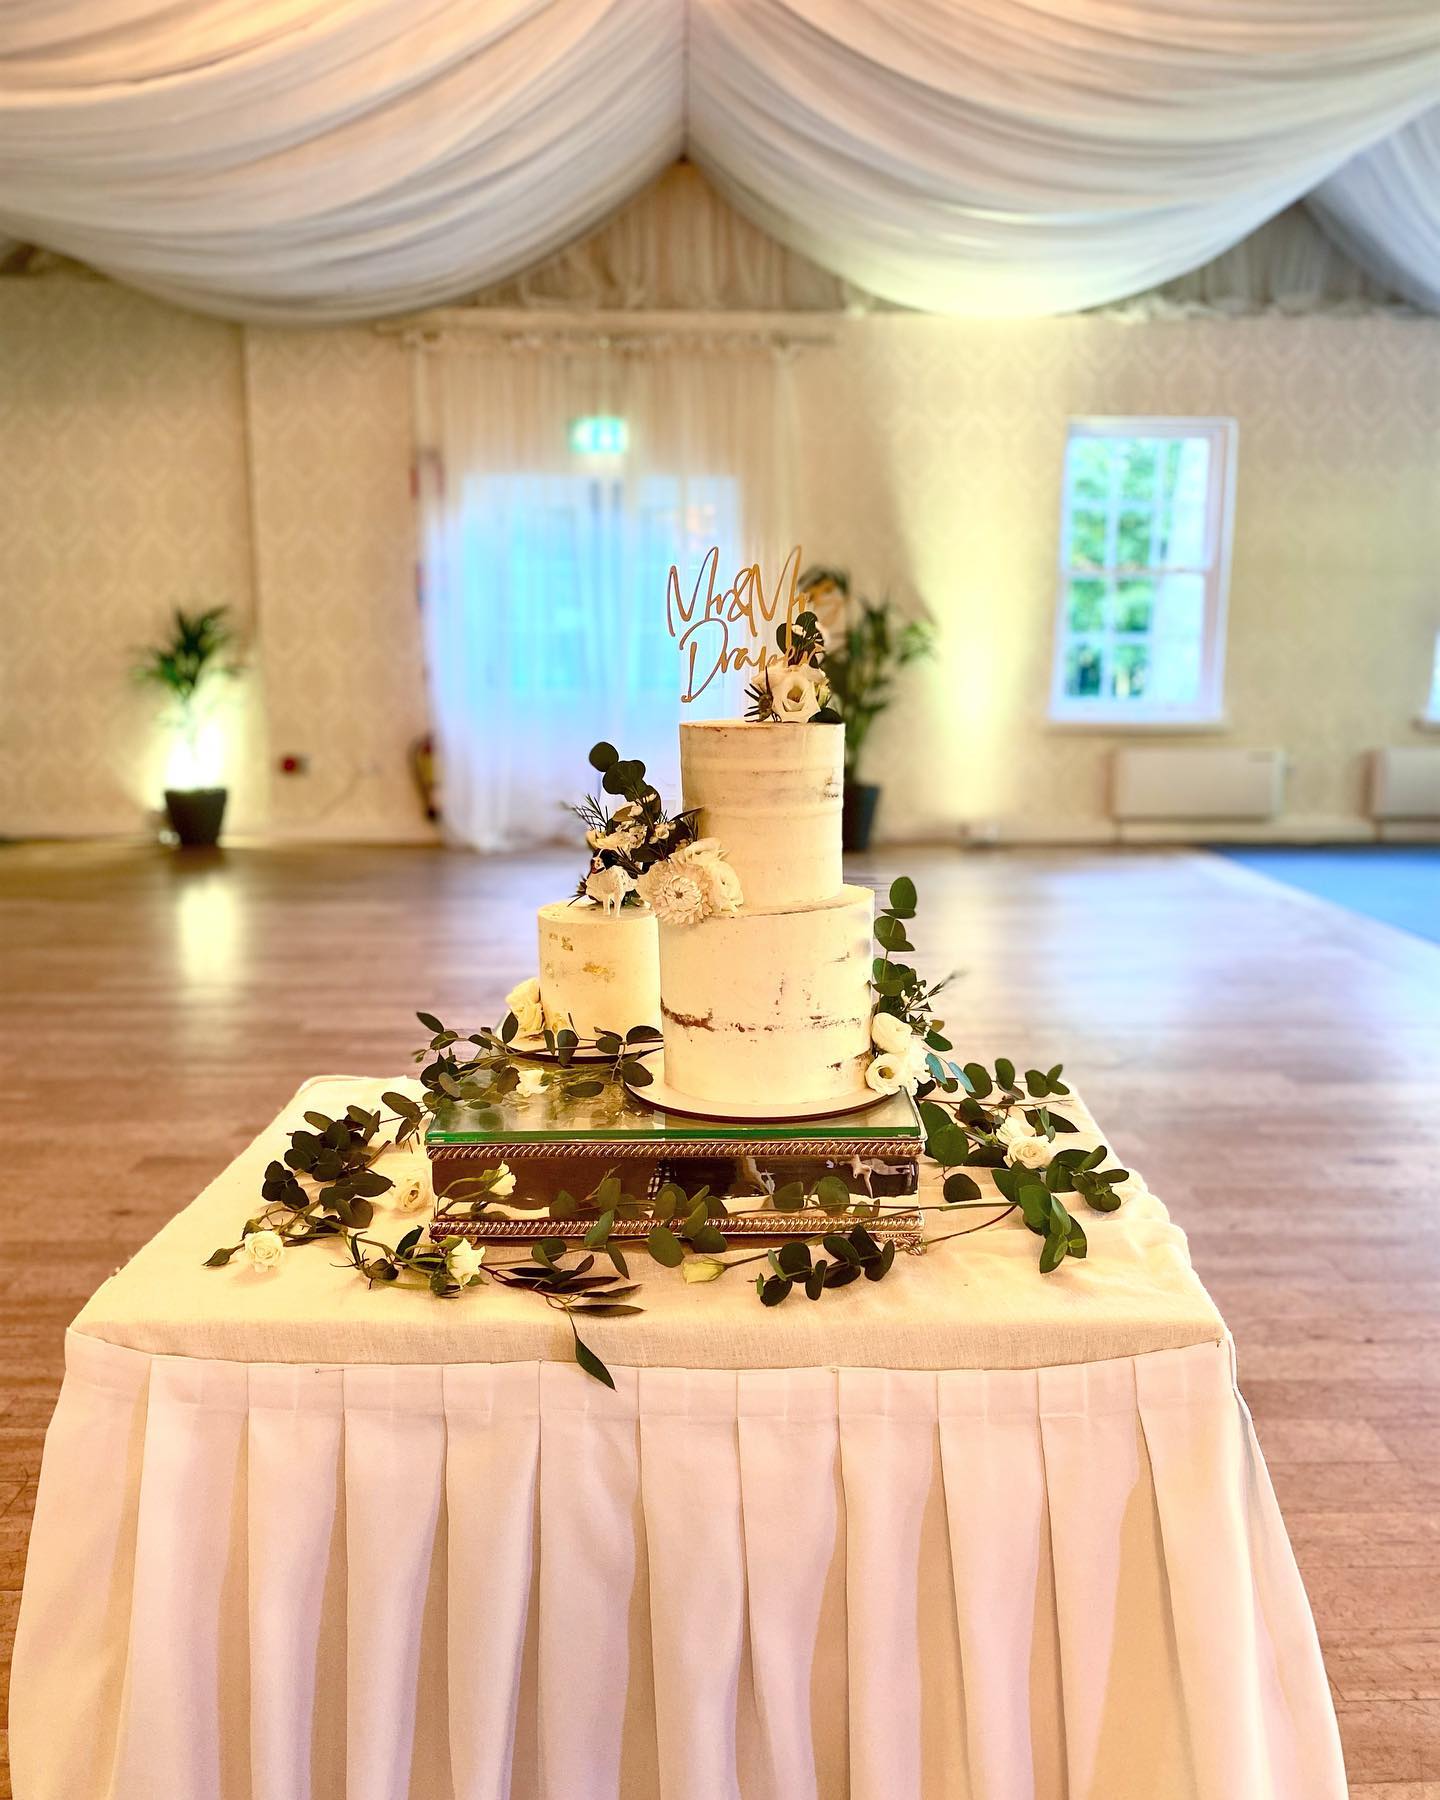 This image highlights the wedding trends of 2022 that we are predicting. This is of a semi-naked cake. Green leaves surround the cake with a gold cake topper on the final tier.